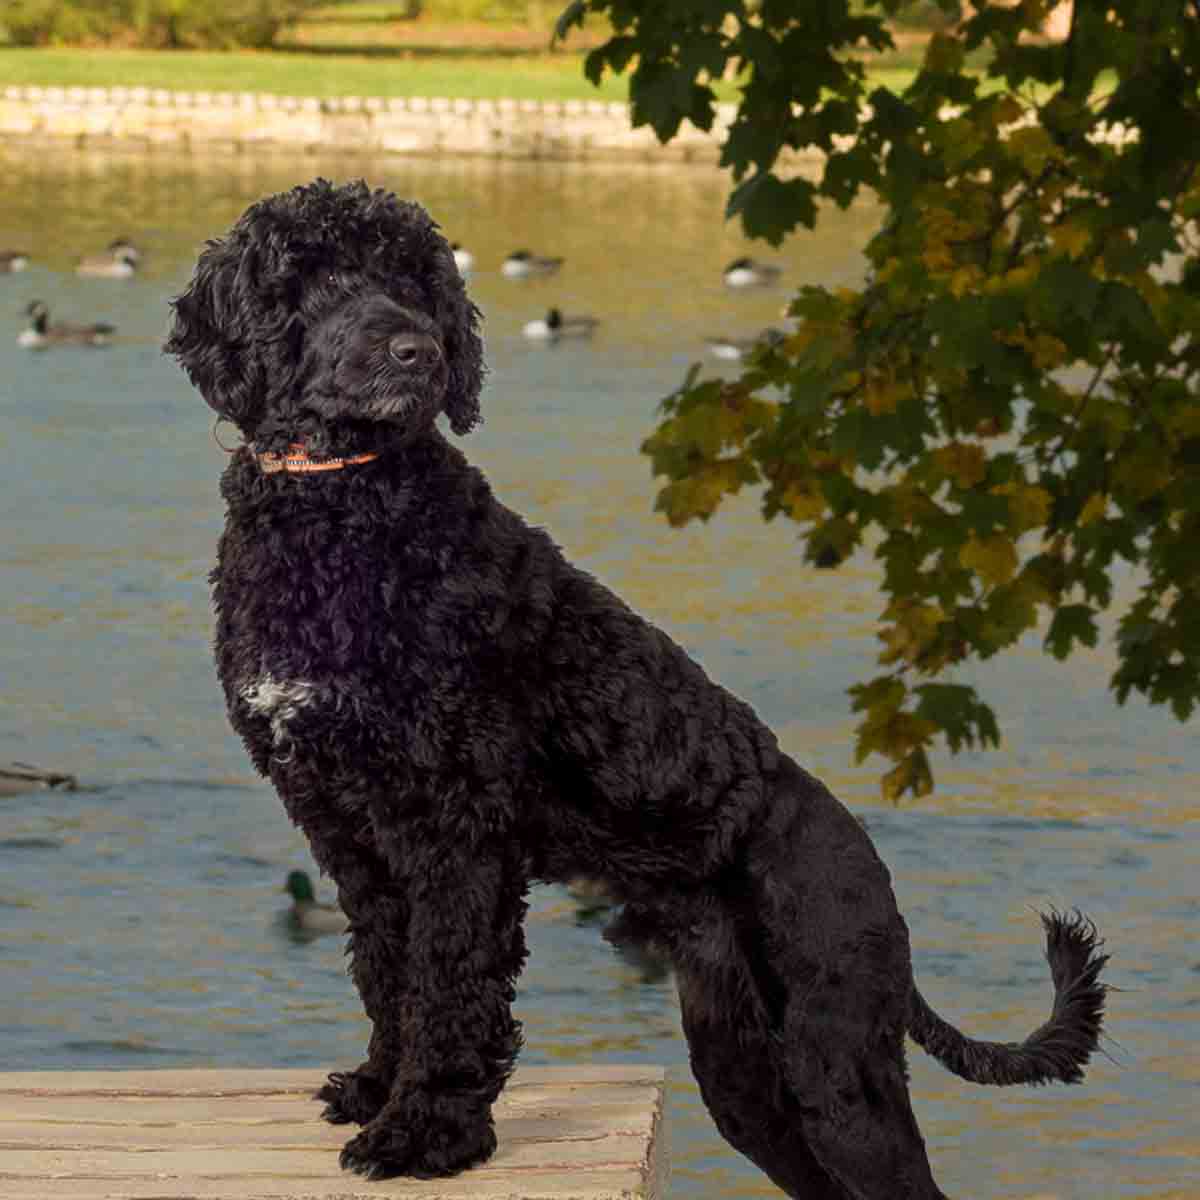 A black dog standing on top of a wooden dock.